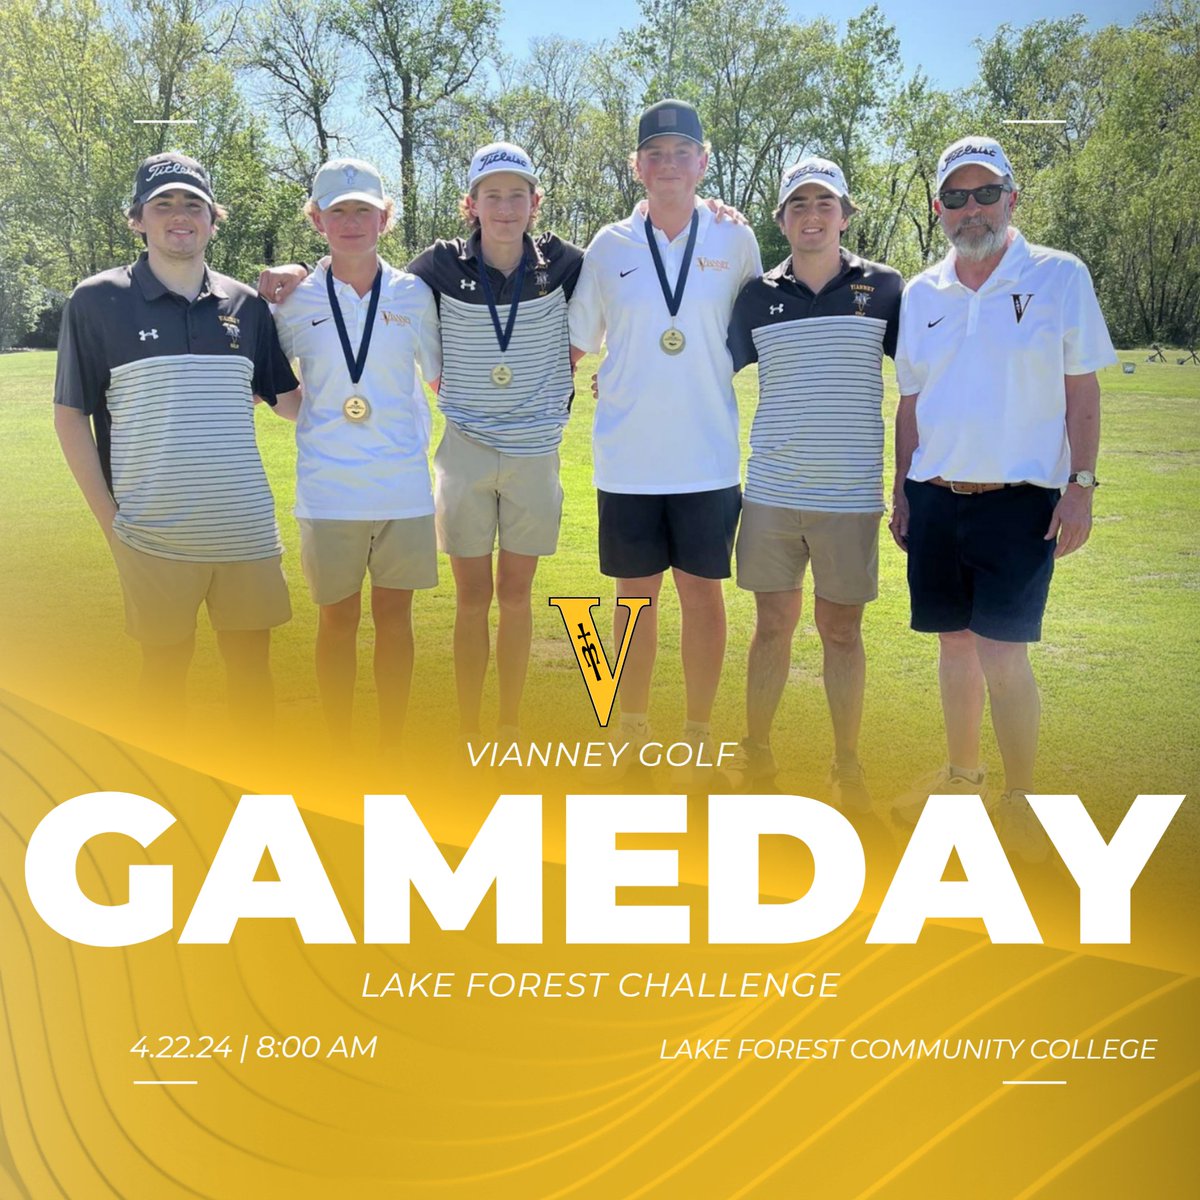 It's Gameday! We have Varsity Golf taking part in the Lake Forest Challenge this morning. Good luck to our Golf Griffins! #VianneyGolf